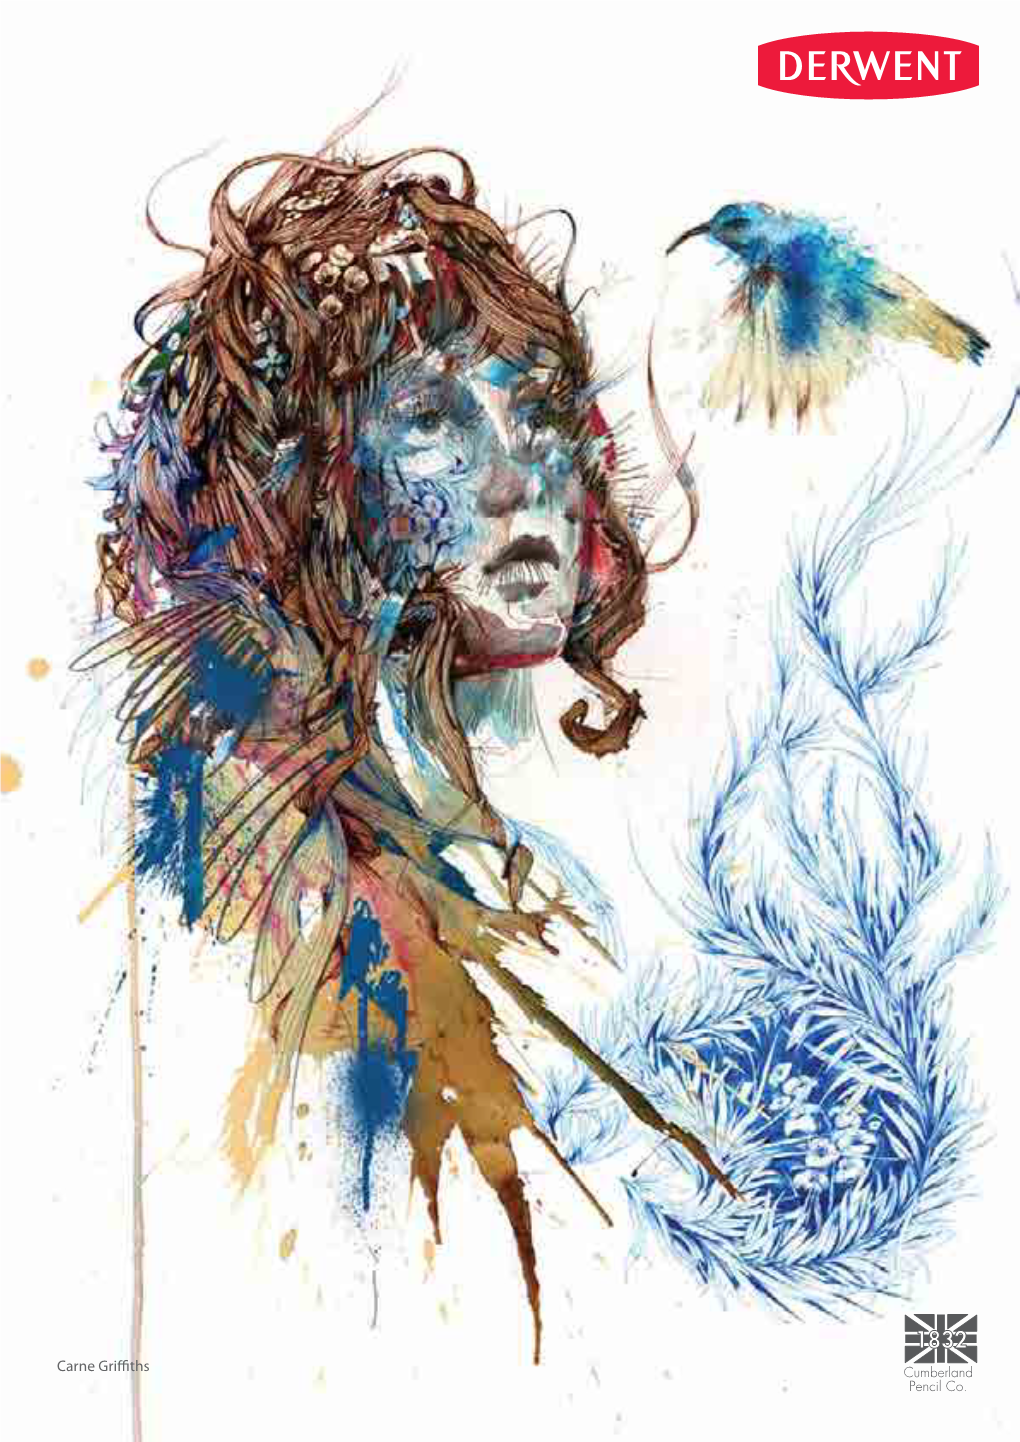 Carne Griffiths Cumberland Pencil Co